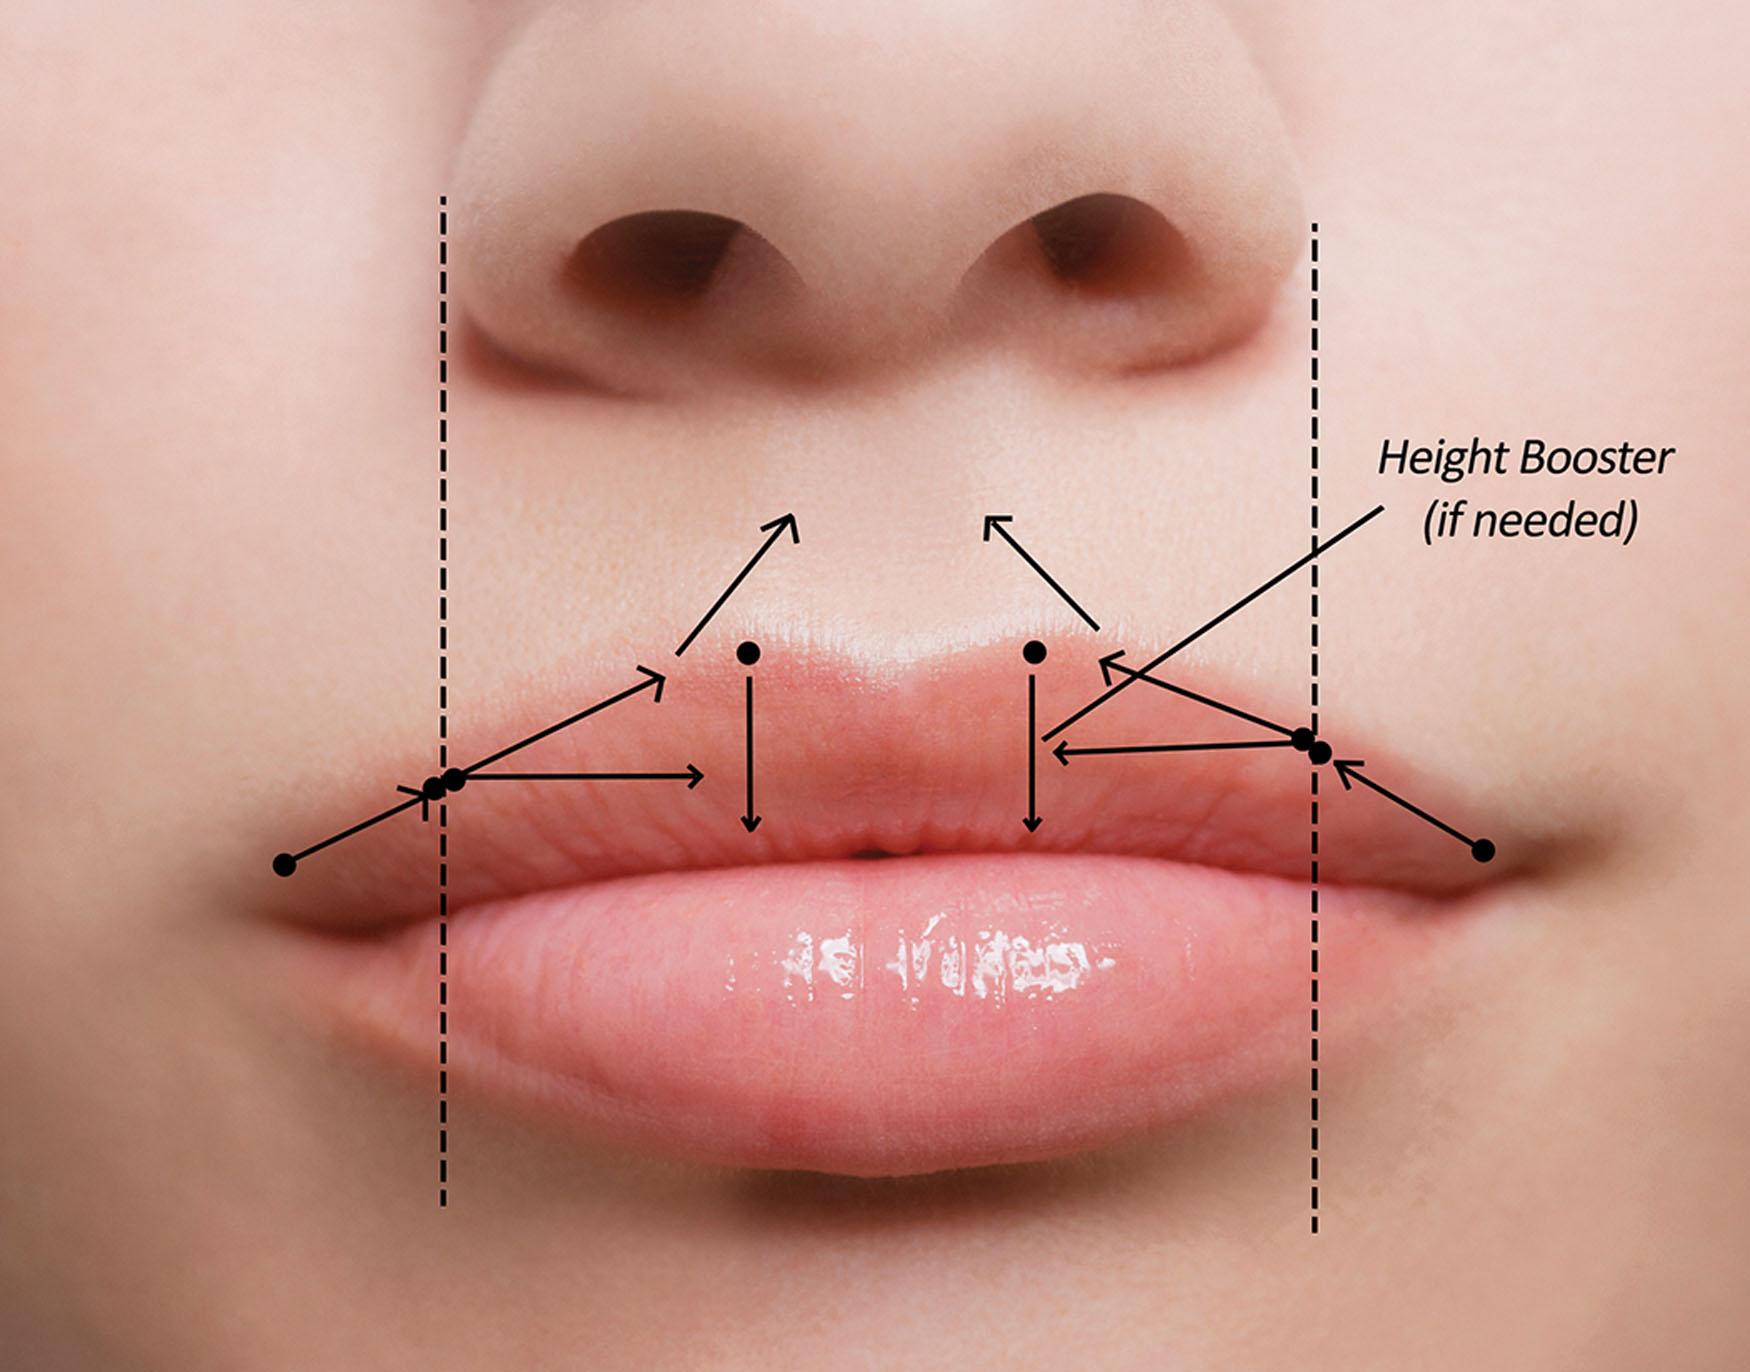 Fig. 10.57, Upper lip injection vectors and landmarks are shown in a youthful and aesthetic lip.